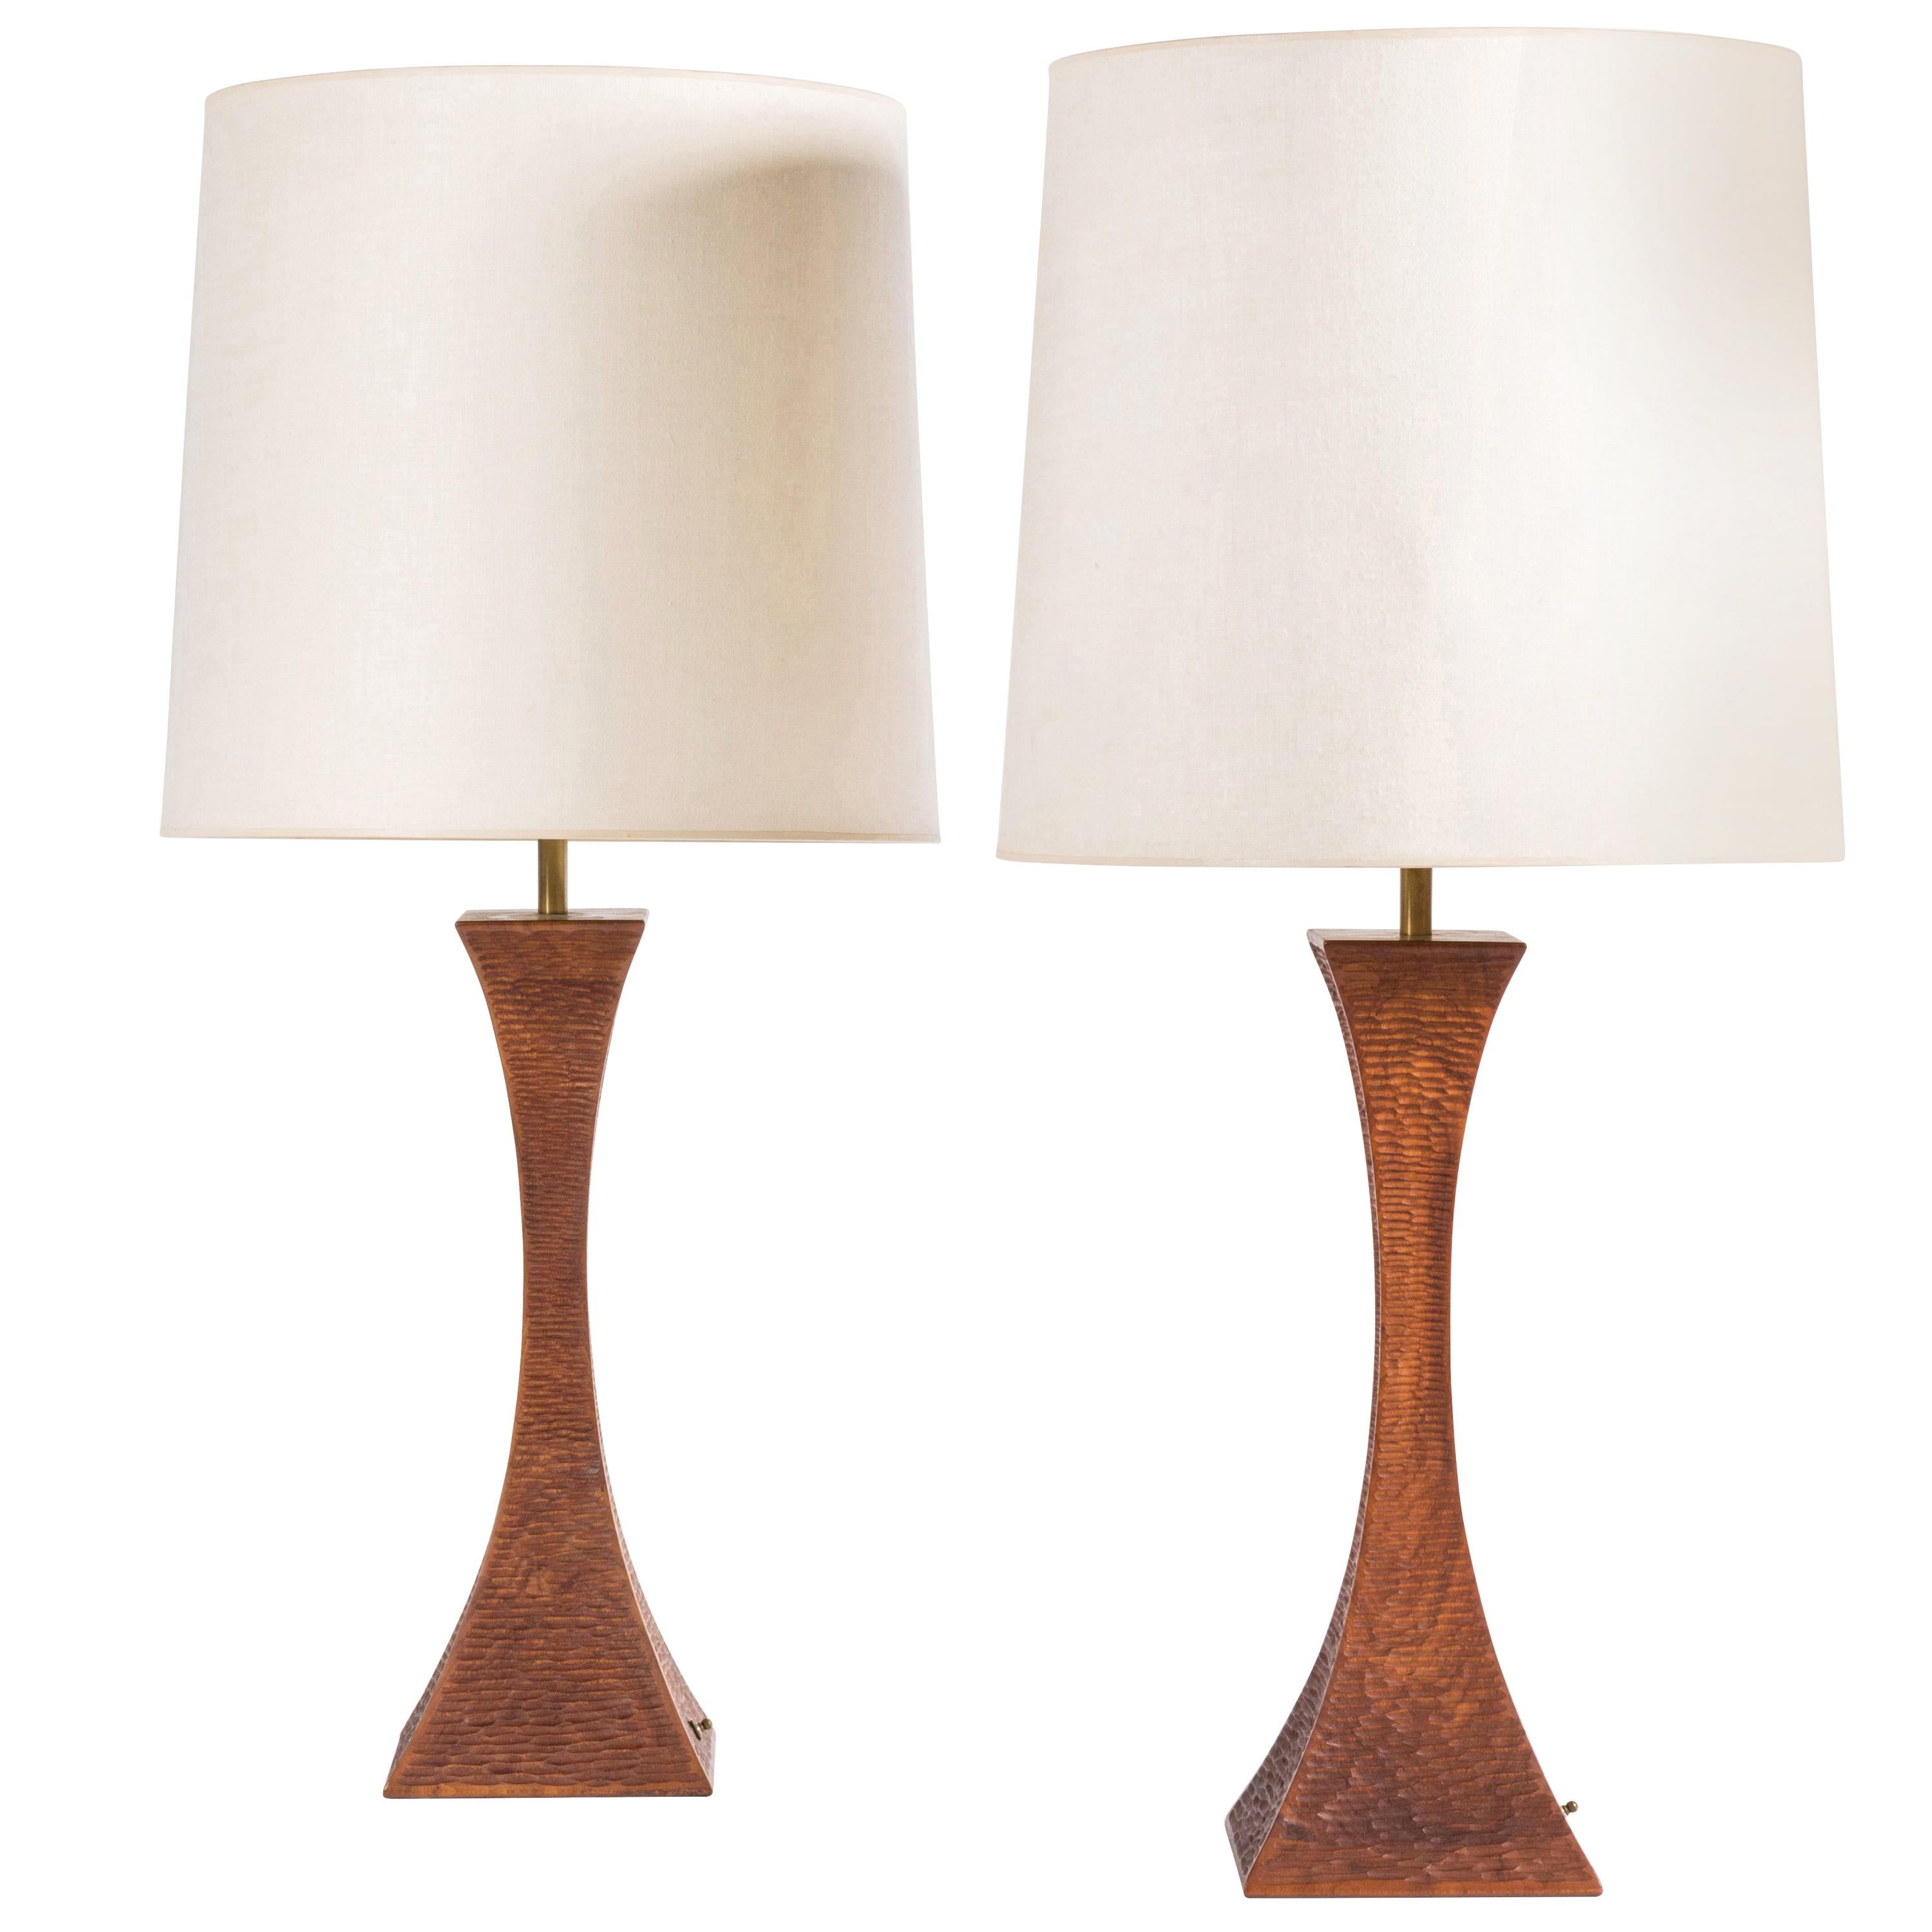 Pair of Table Lamps by Robert Whitley